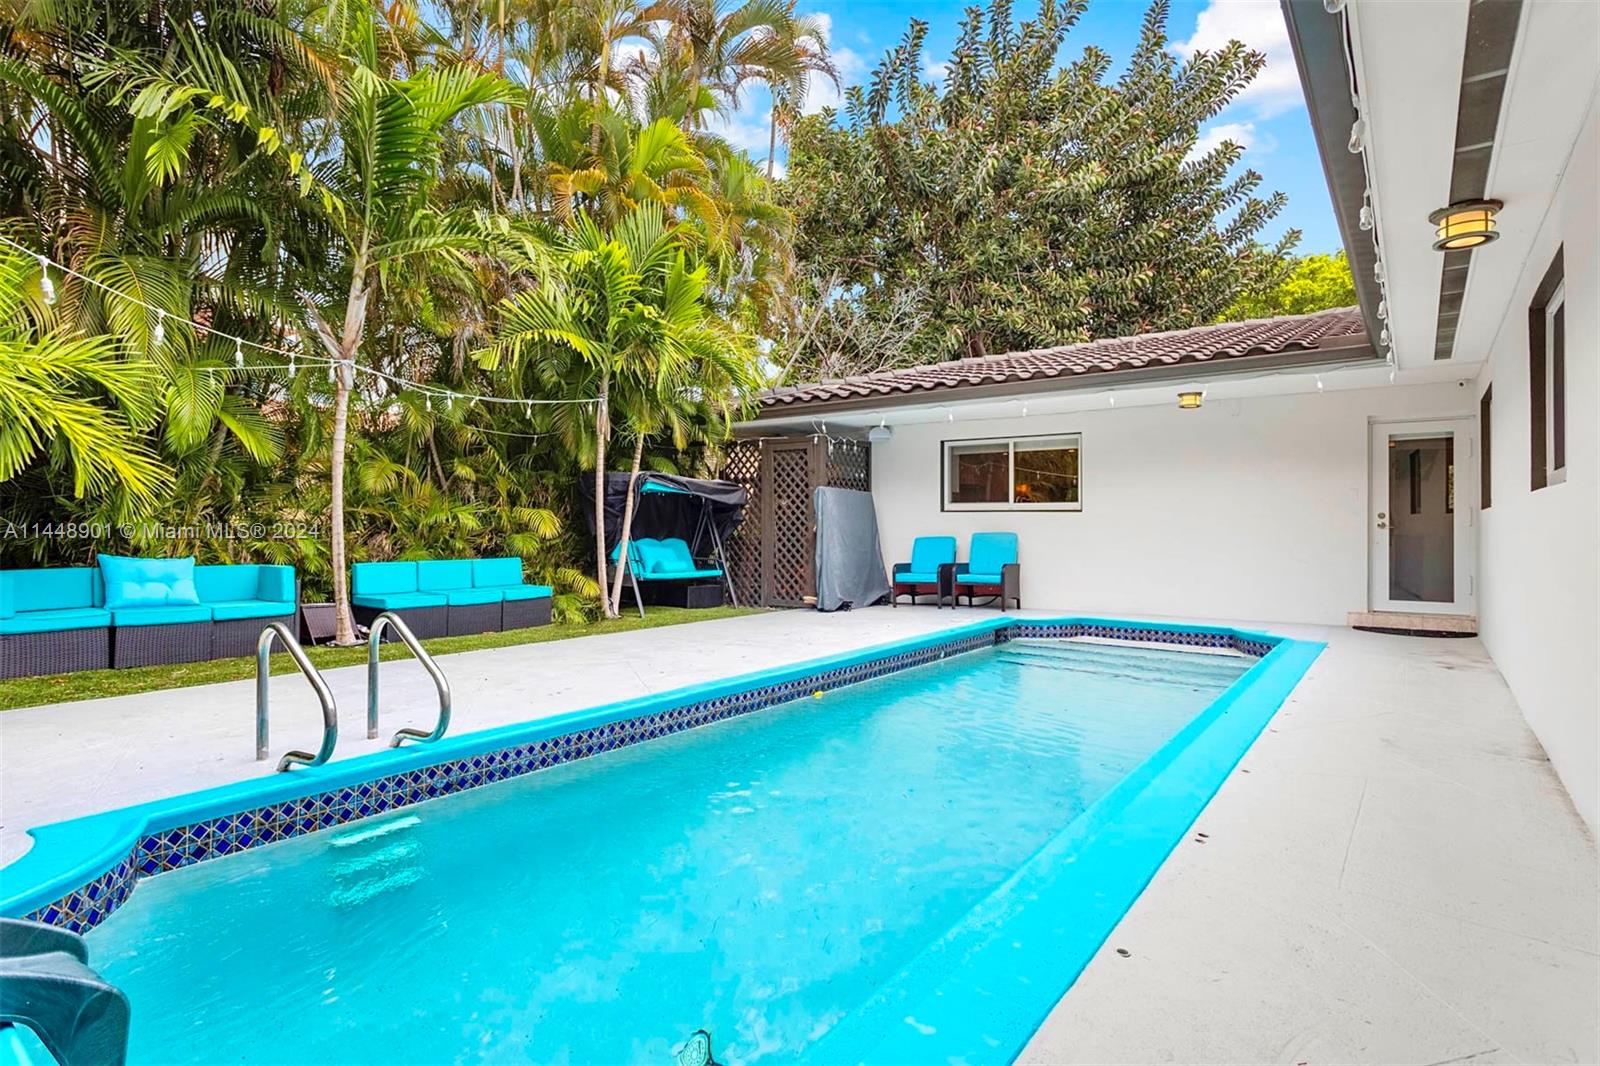 Welcome to this Gem in the heart of Coral Gables! where modern meets convenience and lifestyle! This beautiful home boasts elegant upgrades and a perfect outdoor oasis with a pool to enjoy! The open concept kitchen flows into the cozy living room,  with a fireplace, complemented by marble floors. The house sits on a 5,000 SQFT, has 3 Bedrooms, 2 spa-like Bathrooms. (converted garage to make it to 3 bedrooms.) Custom made closets, high impact windows. Discover the true Coral Gables living with this home located steps from Miracle Mile, Merrick Park, shops and renowned restaurants! Make this exceptional property your new home!